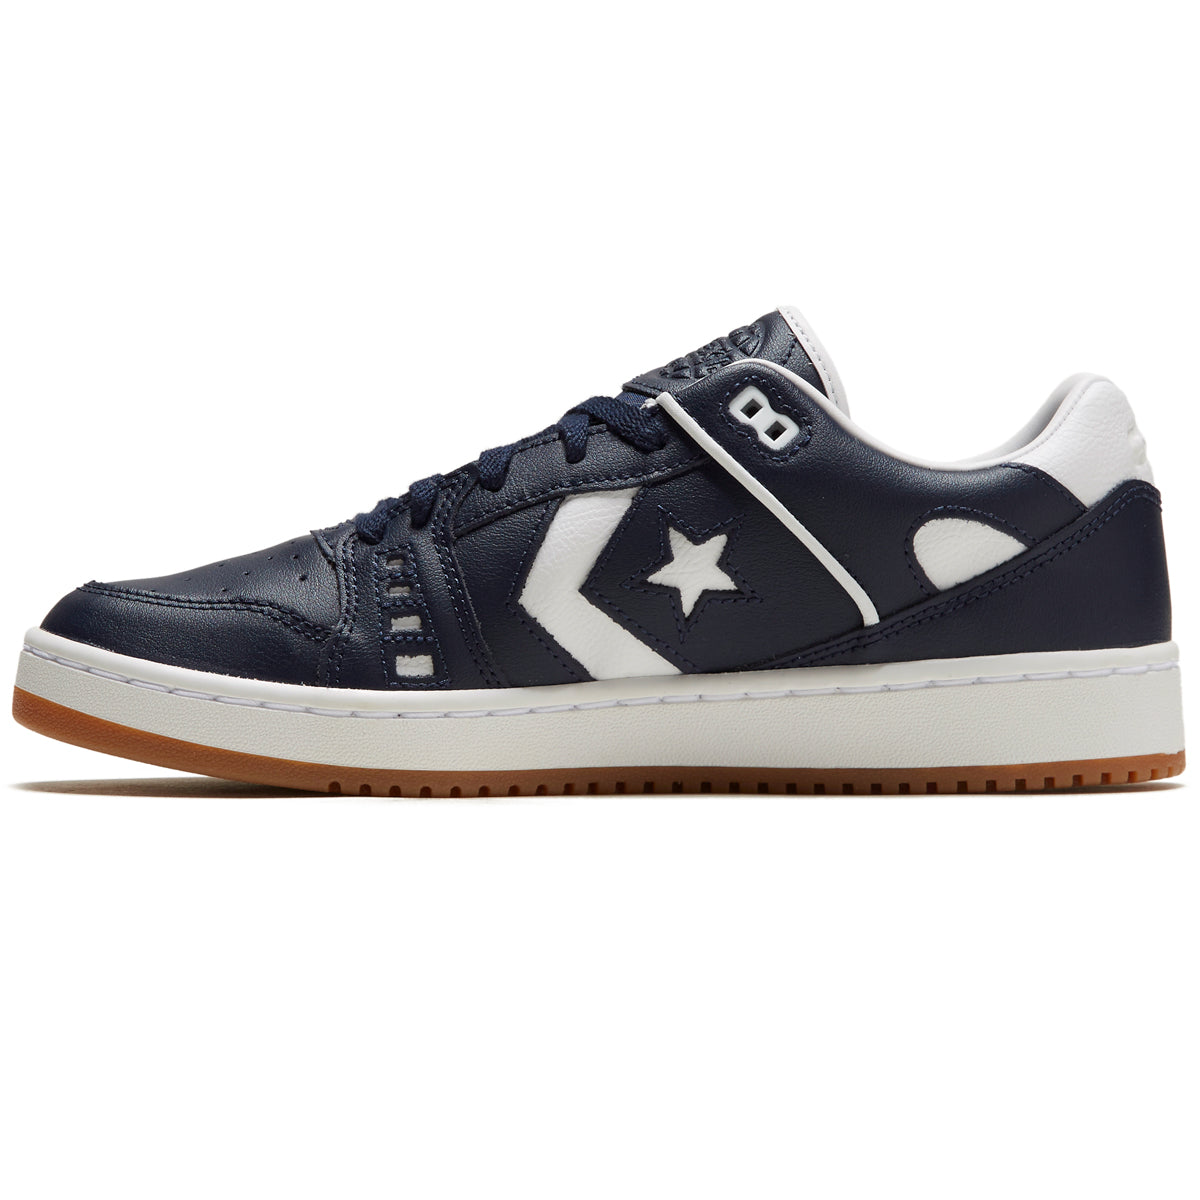 Converse AS-1 Pro Shoes - Obsidian/White/Gum image 2